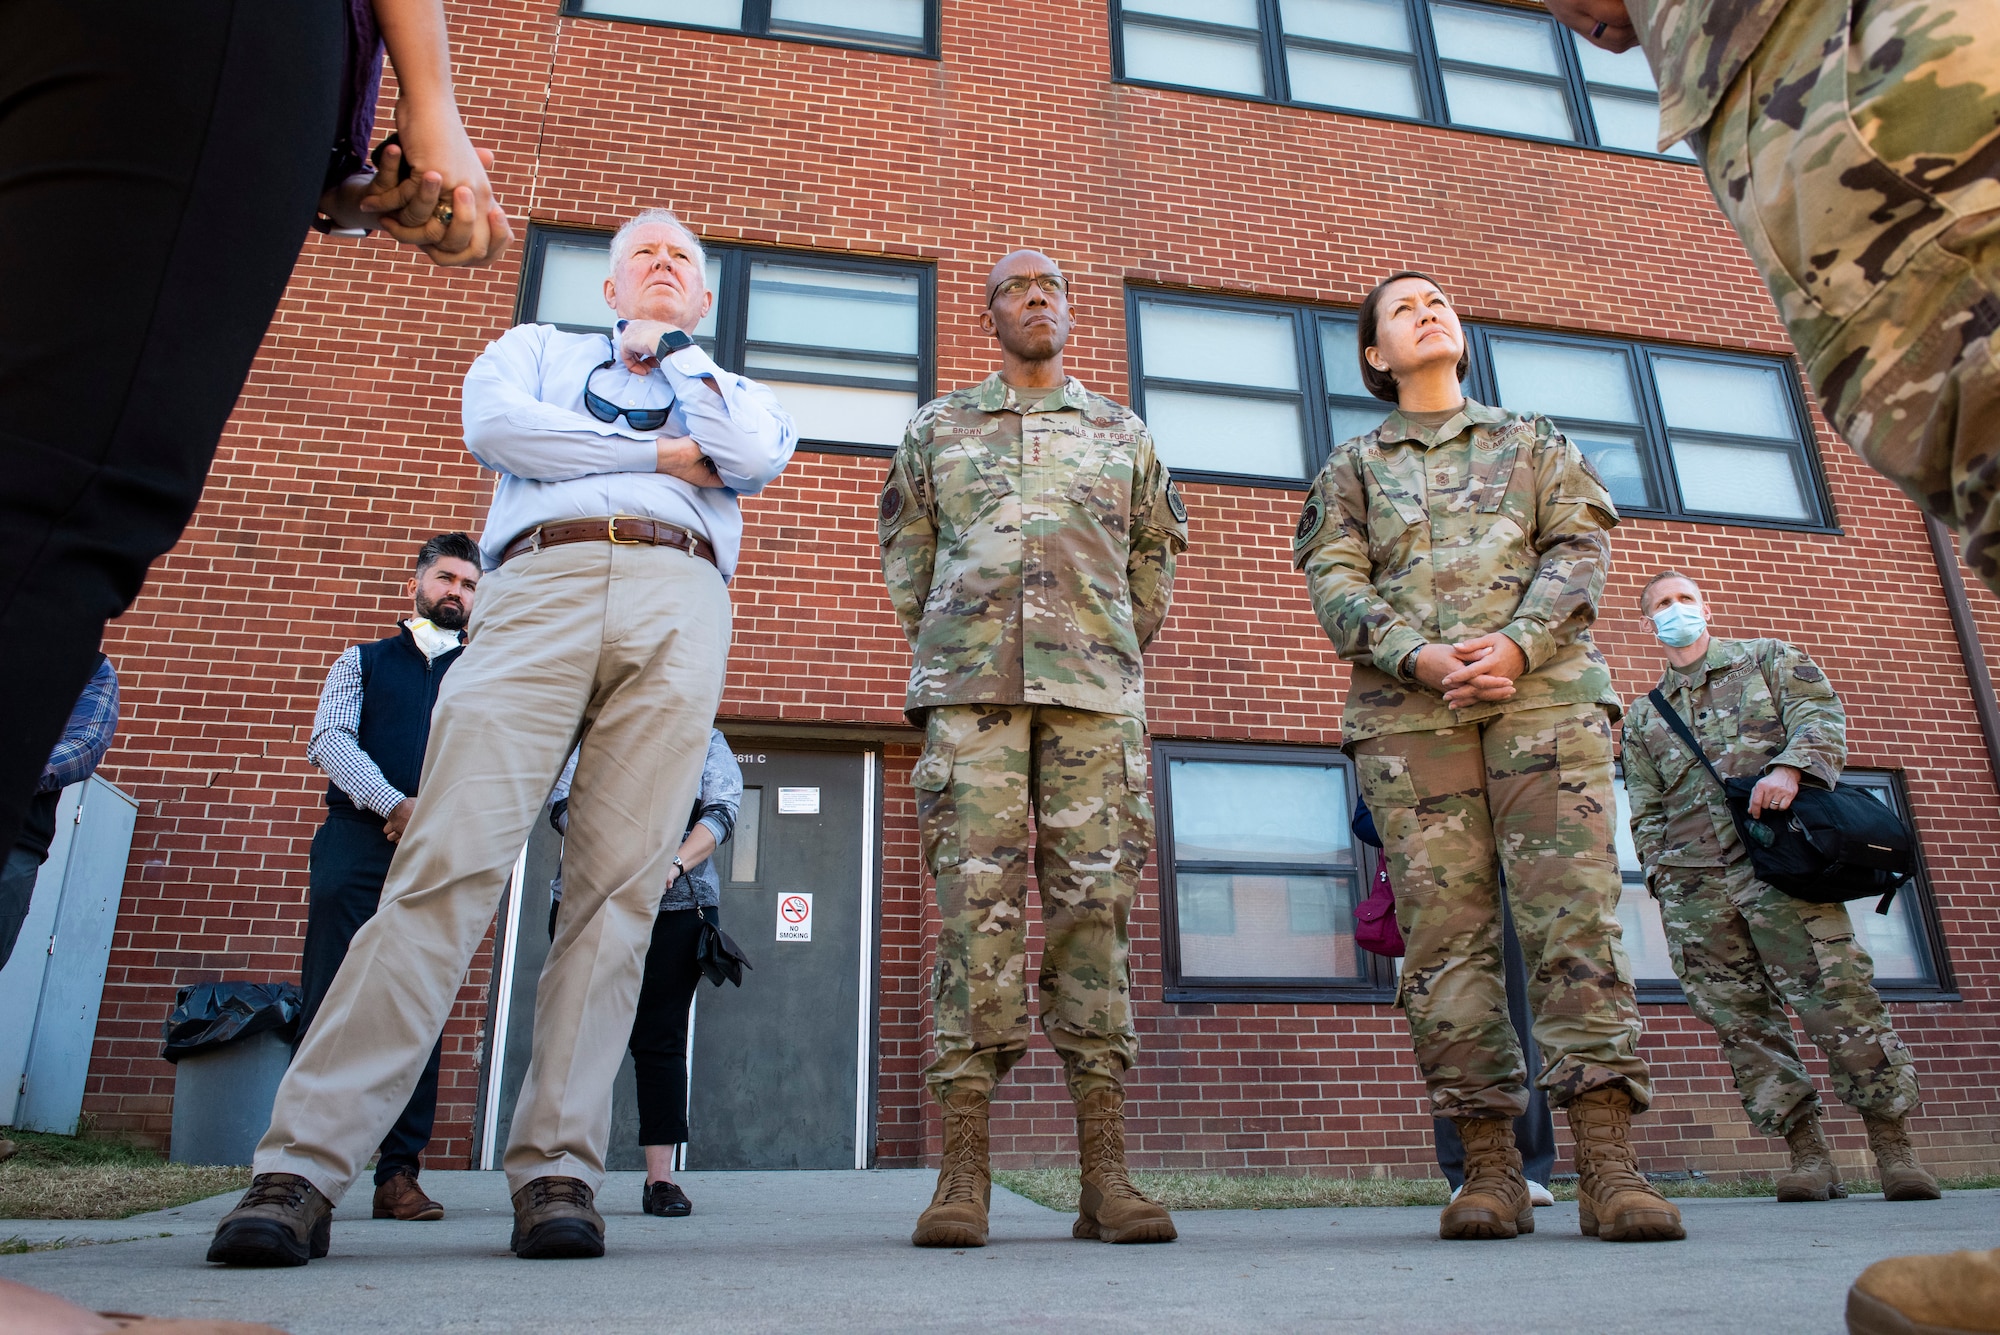 Secretary of the Air Force Frank Kendall, Chief of Staff of the Air Force Gen. CQ Brown, Jr. and Chief Master Sergeant of the Air Force JoAnne Bass, receive a briefing detailing life inside Liberty Village during a visit to Joint Base McGuire-Dix-Lakehurst, New Jersey, Sept. 25, 2021. The Department of Defense, through U.S. Northern Command, and in support of the Department of Homeland Security, is providing transportation, temporary housing, medical screening, and general support for at least 50,000 Afghan evacuees at suitable facilities, in permanent or temporary structures, as quickly as possible. This initiative provides Afghan personnel essential support at secure locations outside Afghanistan. (U.S. Air Force photo by Staff Sgt. Jake Carter)